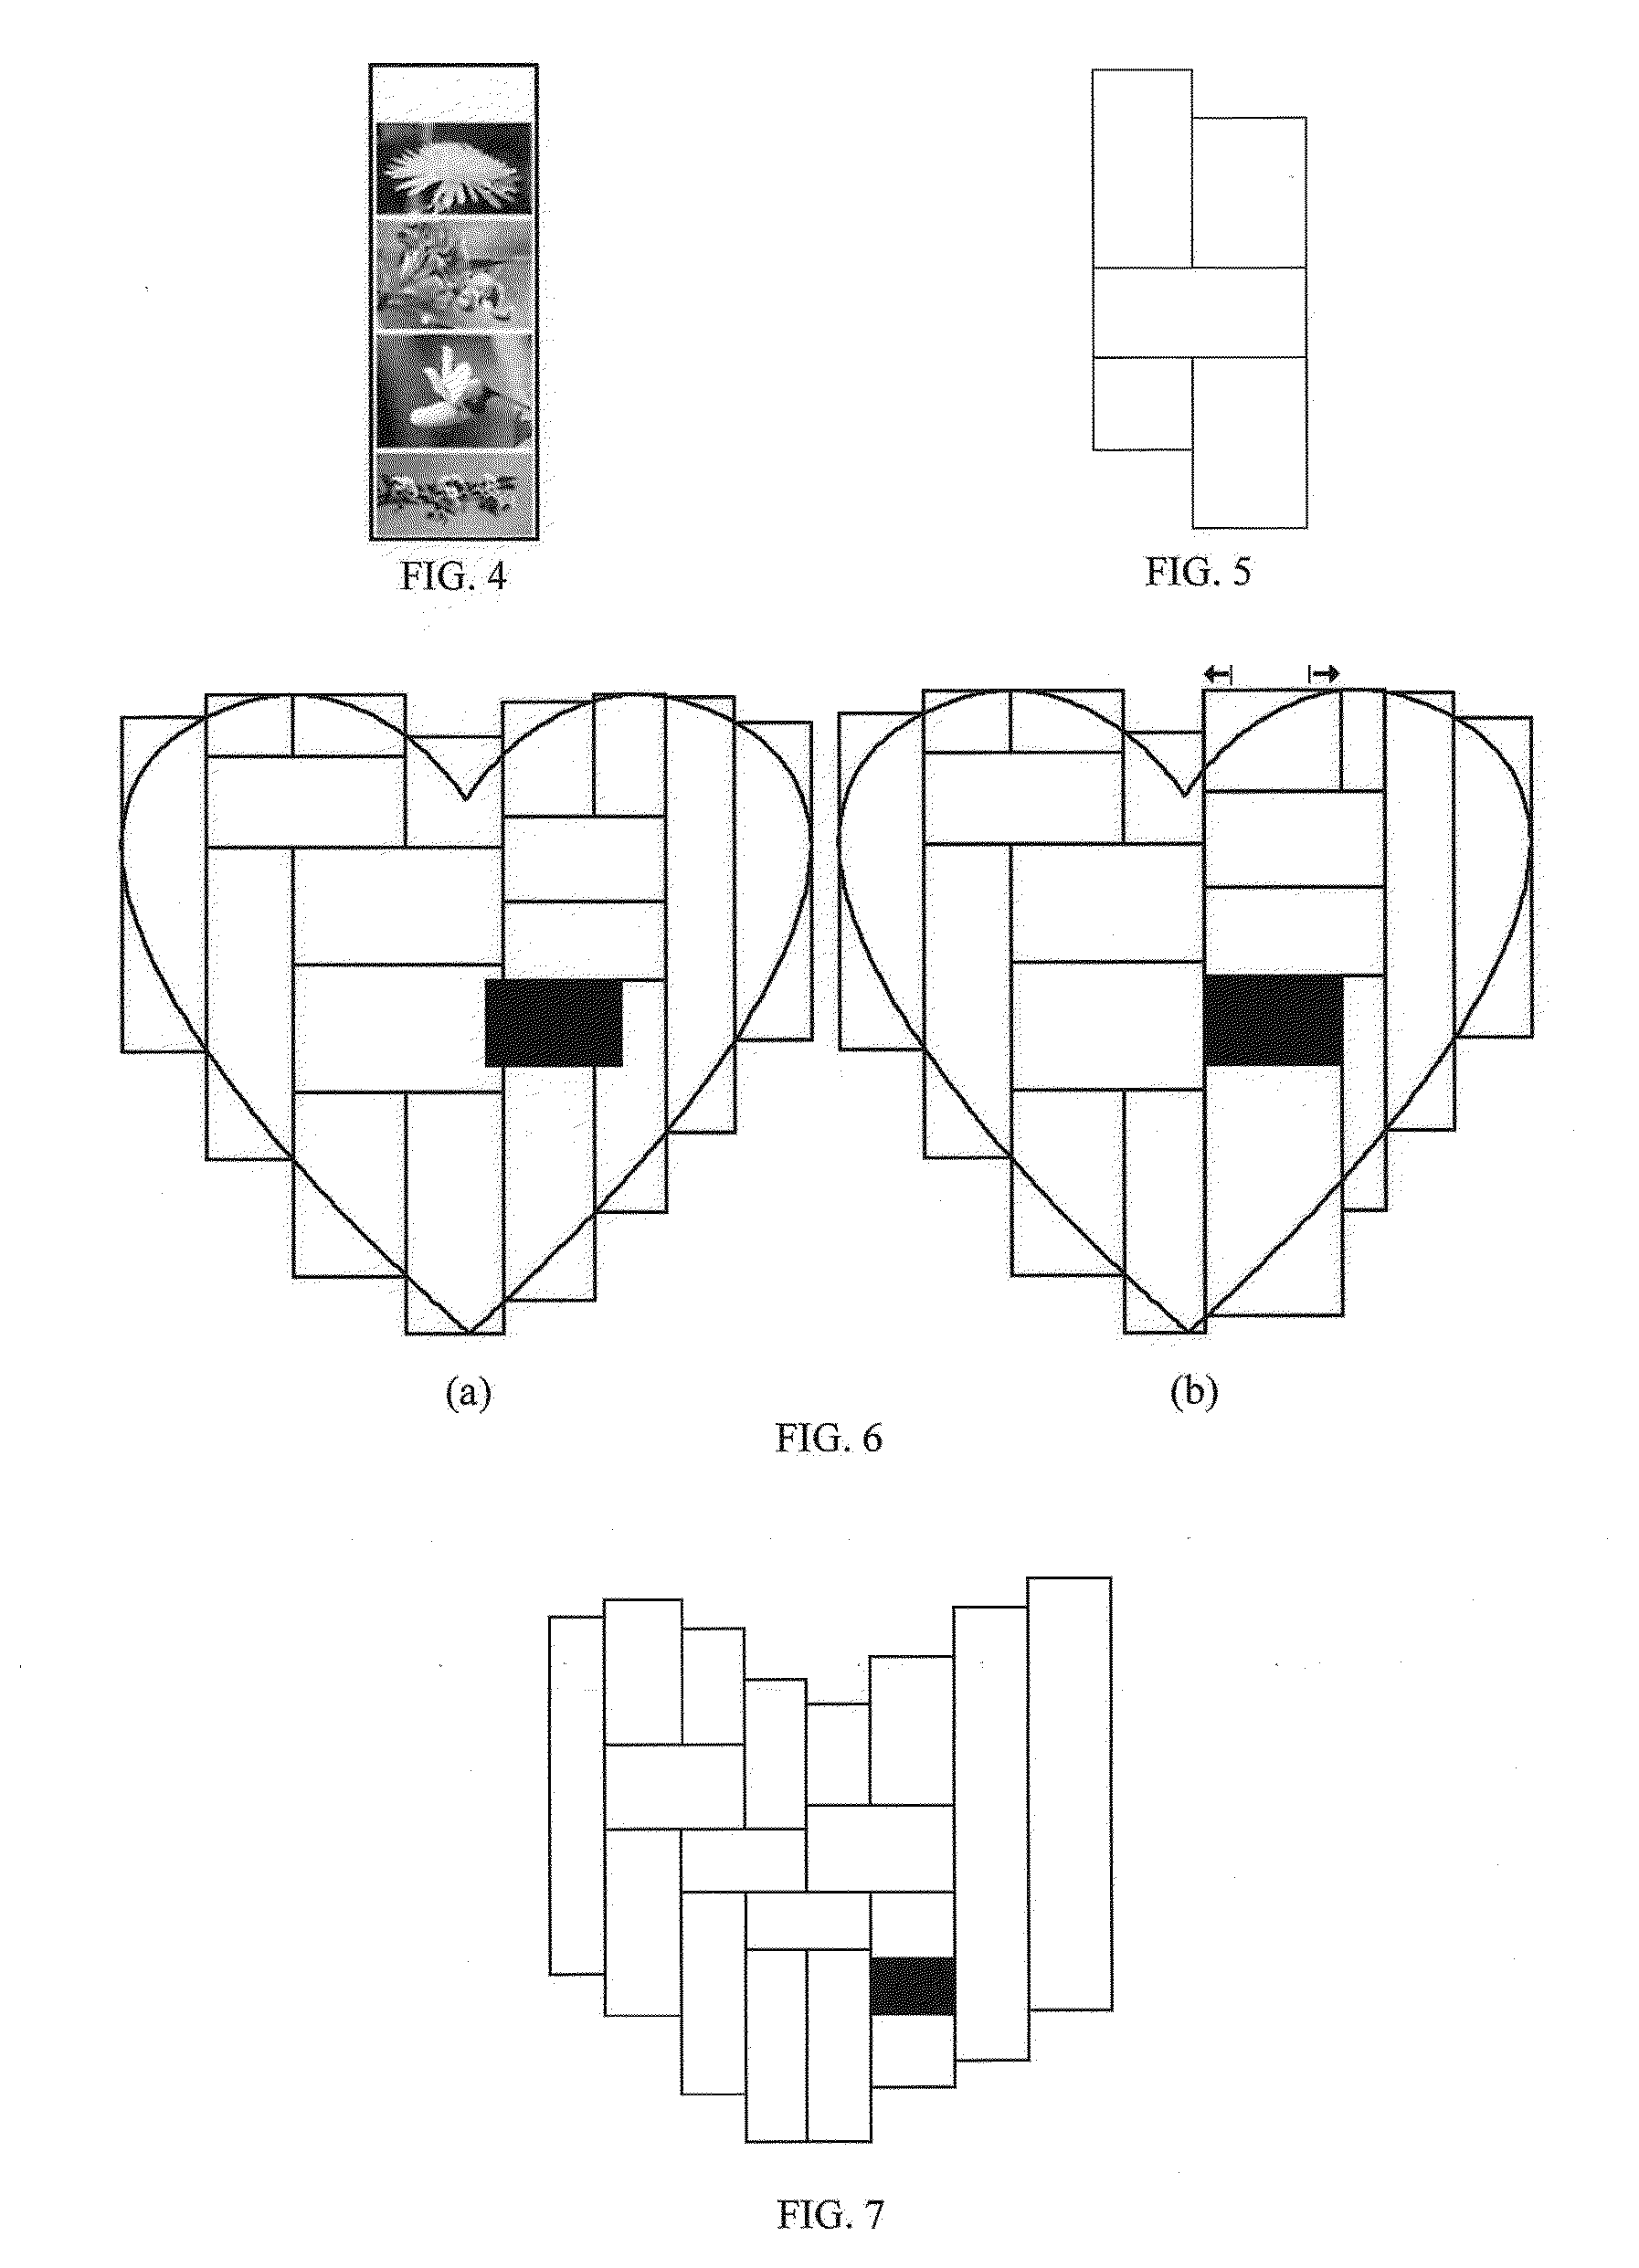 Method, system and computer program product for creating shape collages